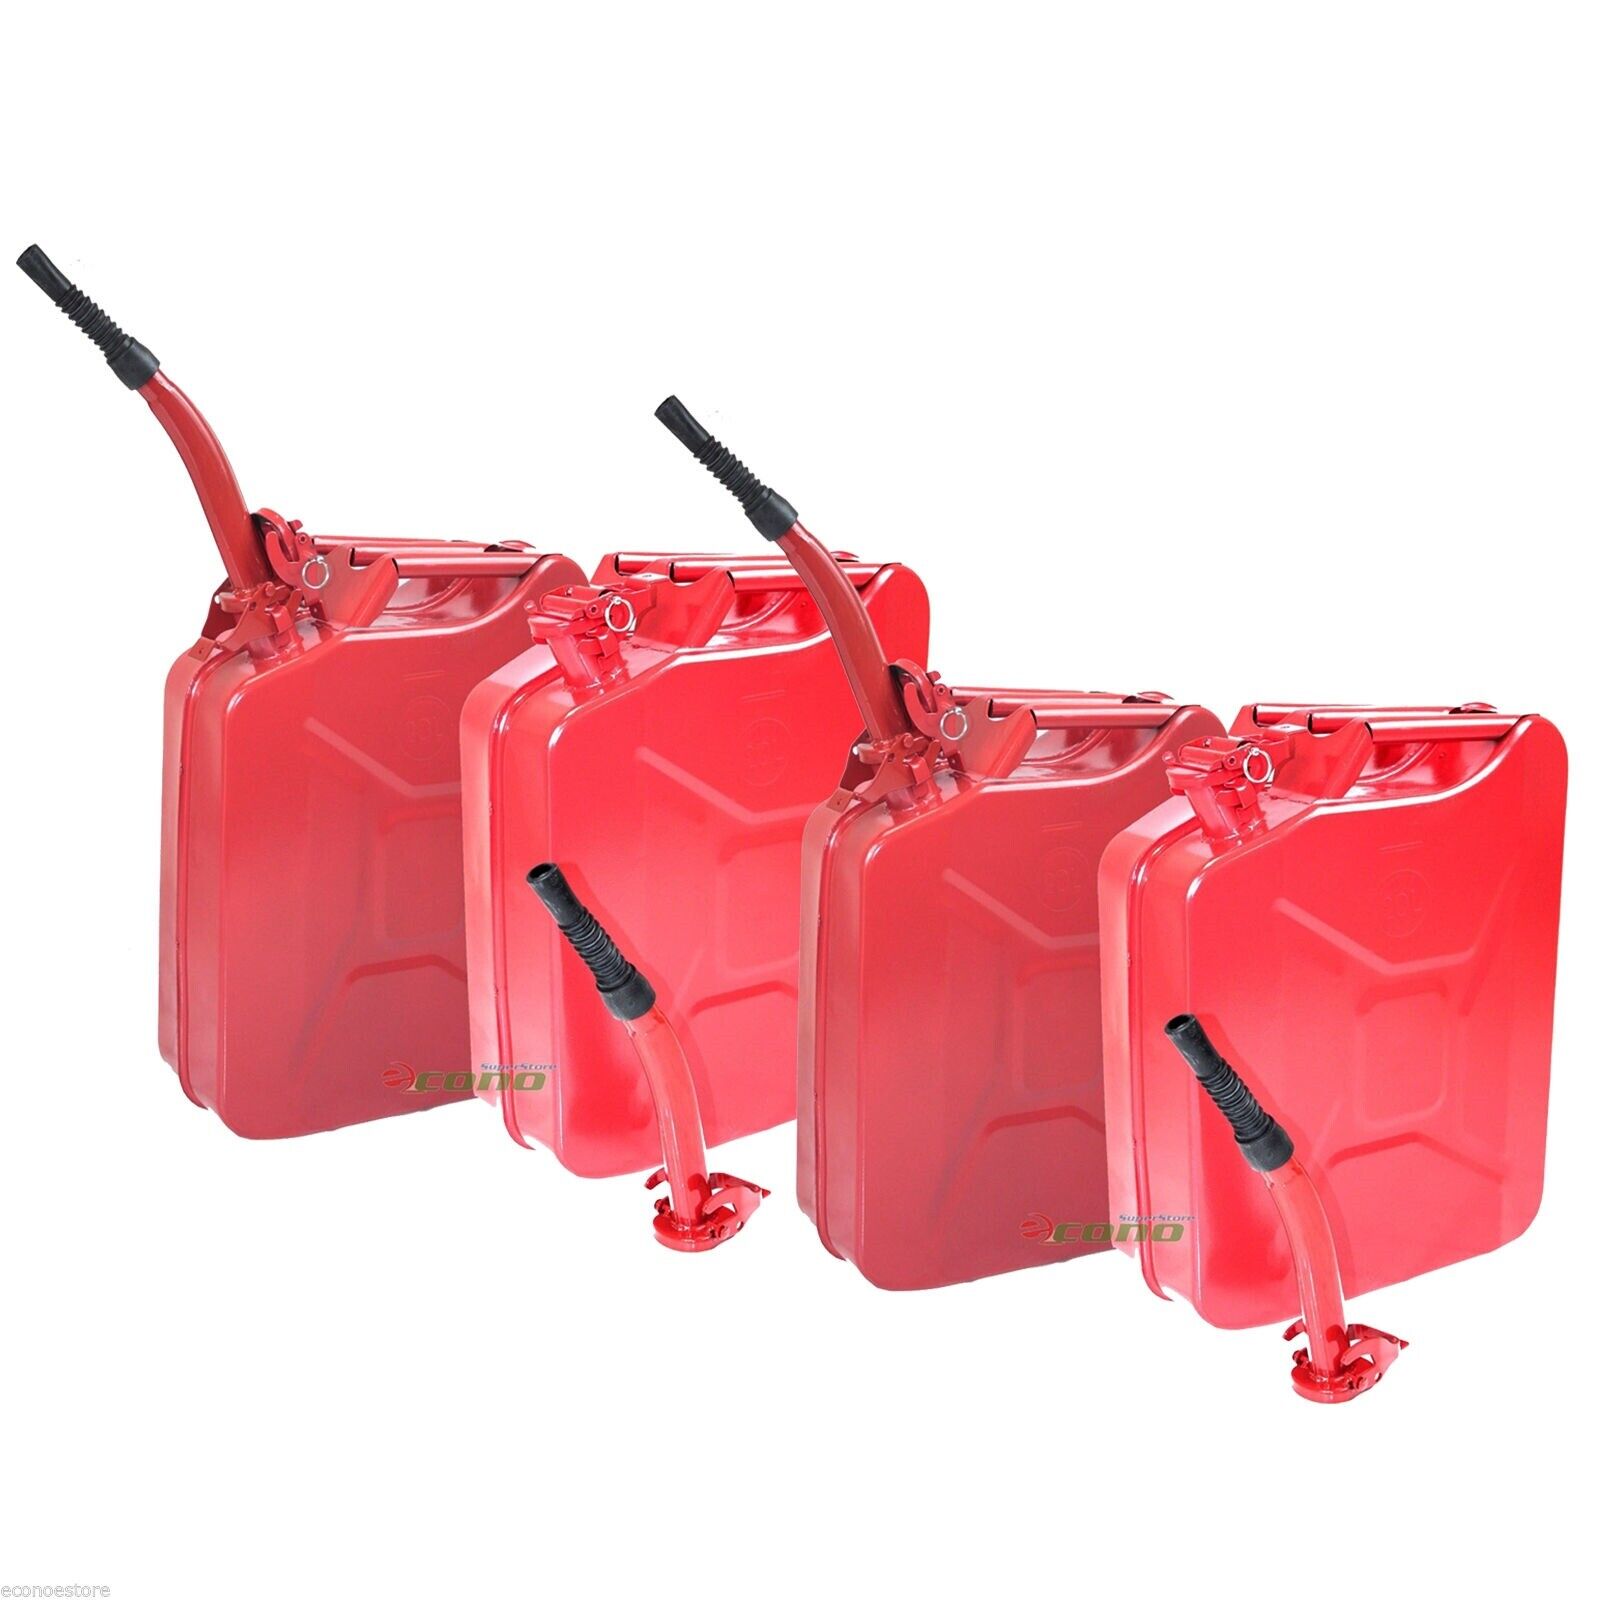 Lot 4 RED 5 Gallon Jerry Can Gasoline Steel Tank Military Style Storage Can